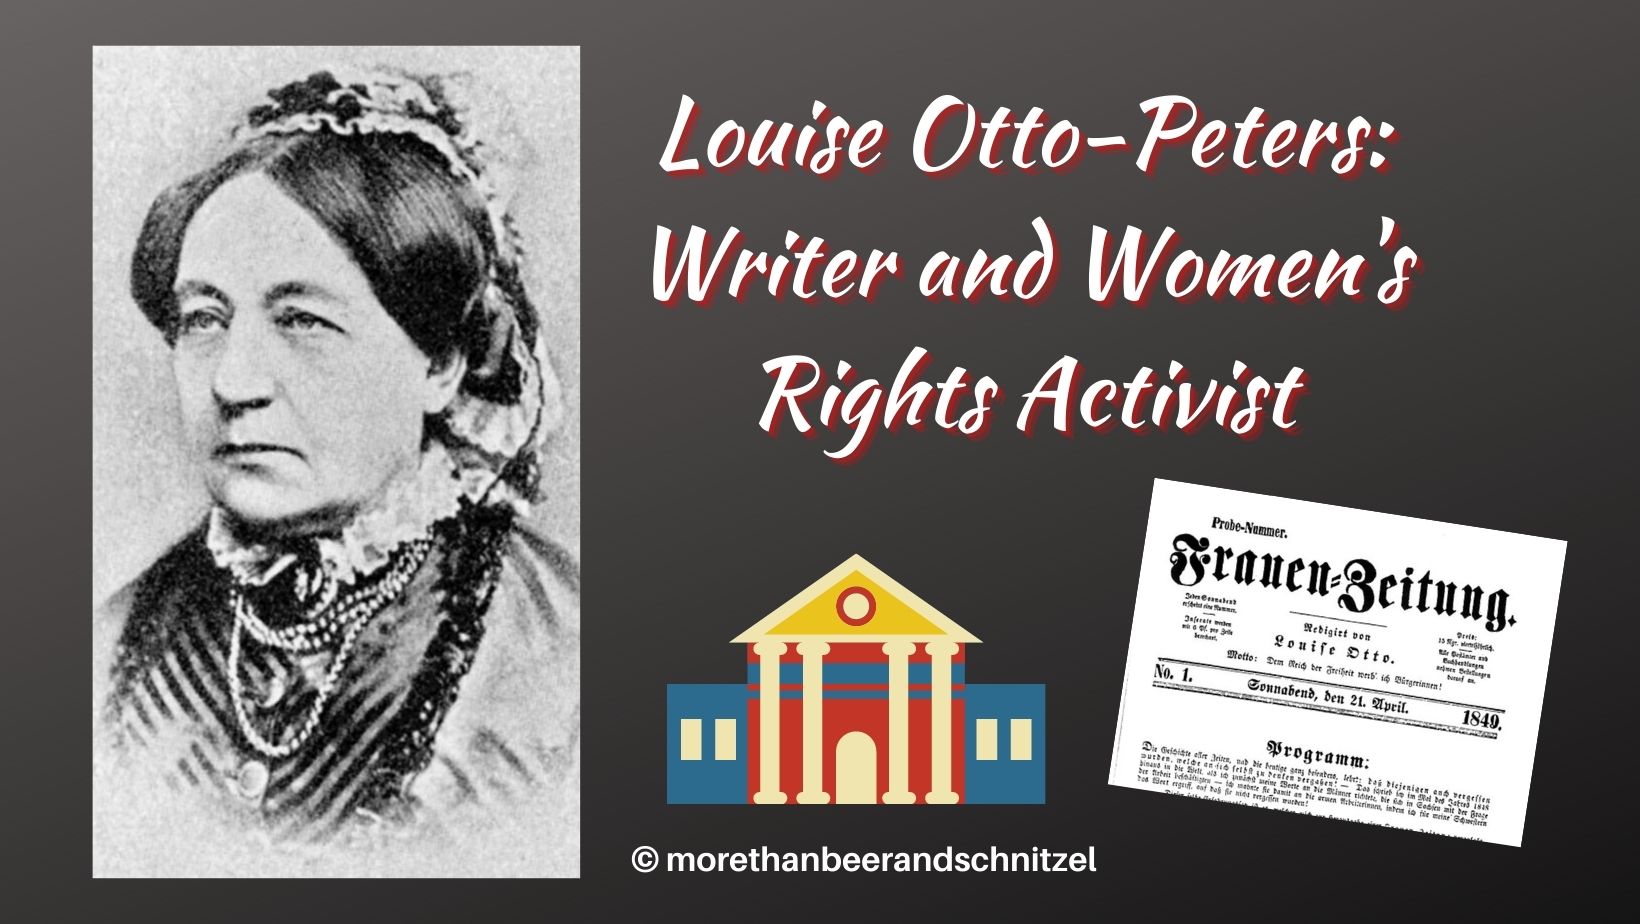 Louise Otto-Peters: Writer and Women's Rights Activist - More than Beer and Schnitzel